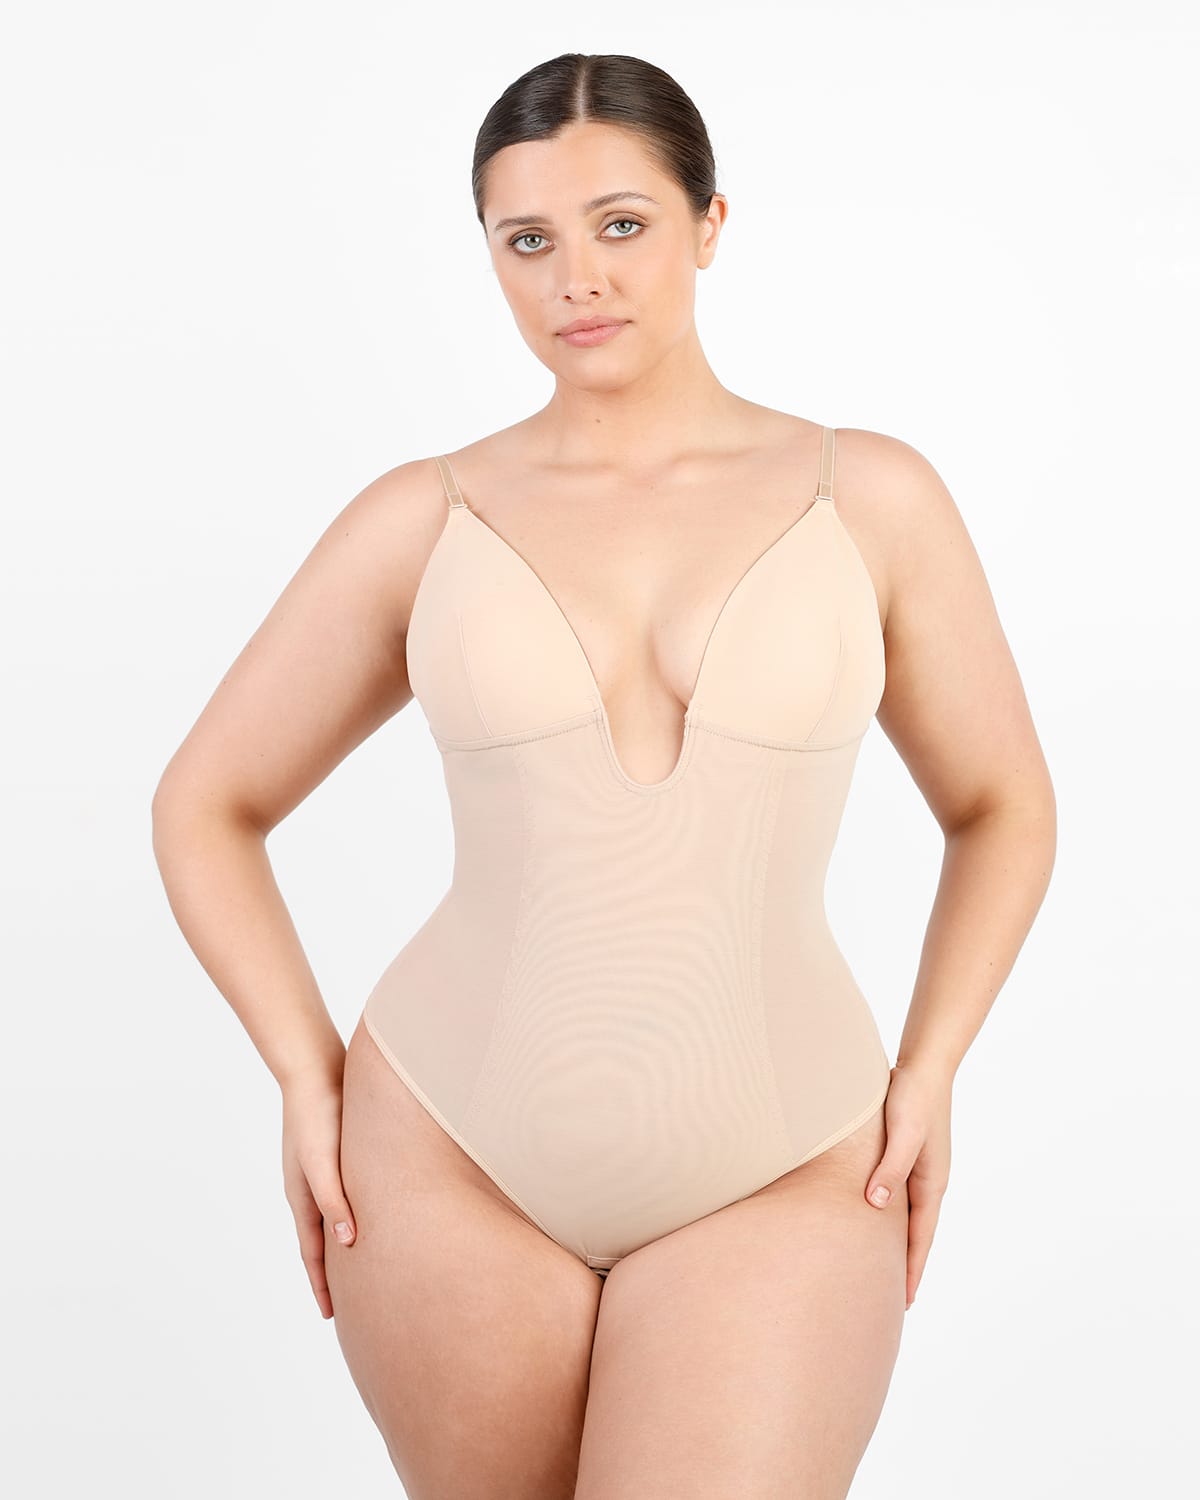 Shapellx AirSlim Seamless Open Bust Panty Bodysuit Review l